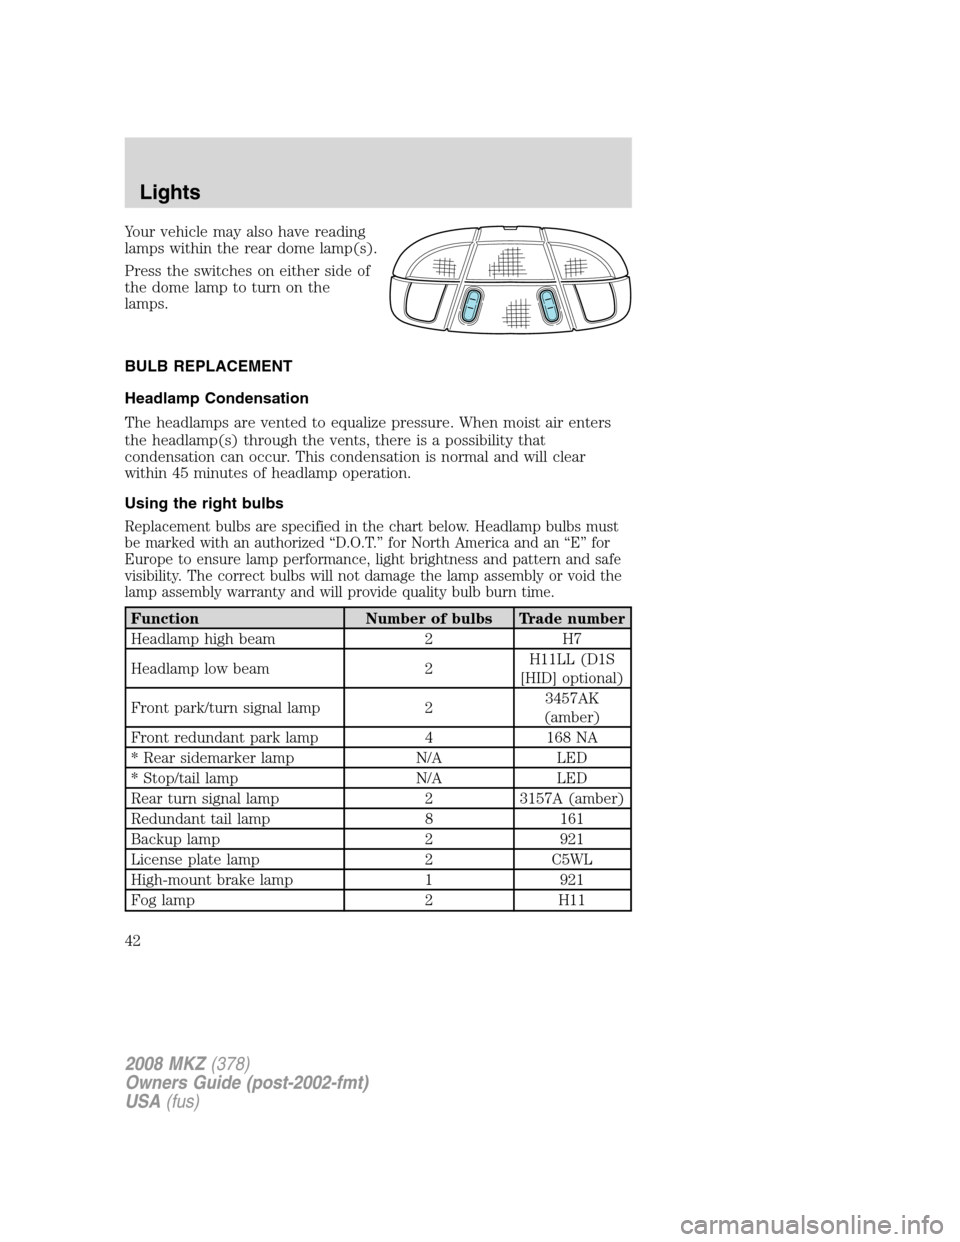 LINCOLN MKZ 2008 Service Manual Your vehicle may also have reading
lamps within the rear dome lamp(s).
Press the switches on either side of
the dome lamp to turn on the
lamps.
BULB REPLACEMENT
Headlamp Condensation
The headlamps are